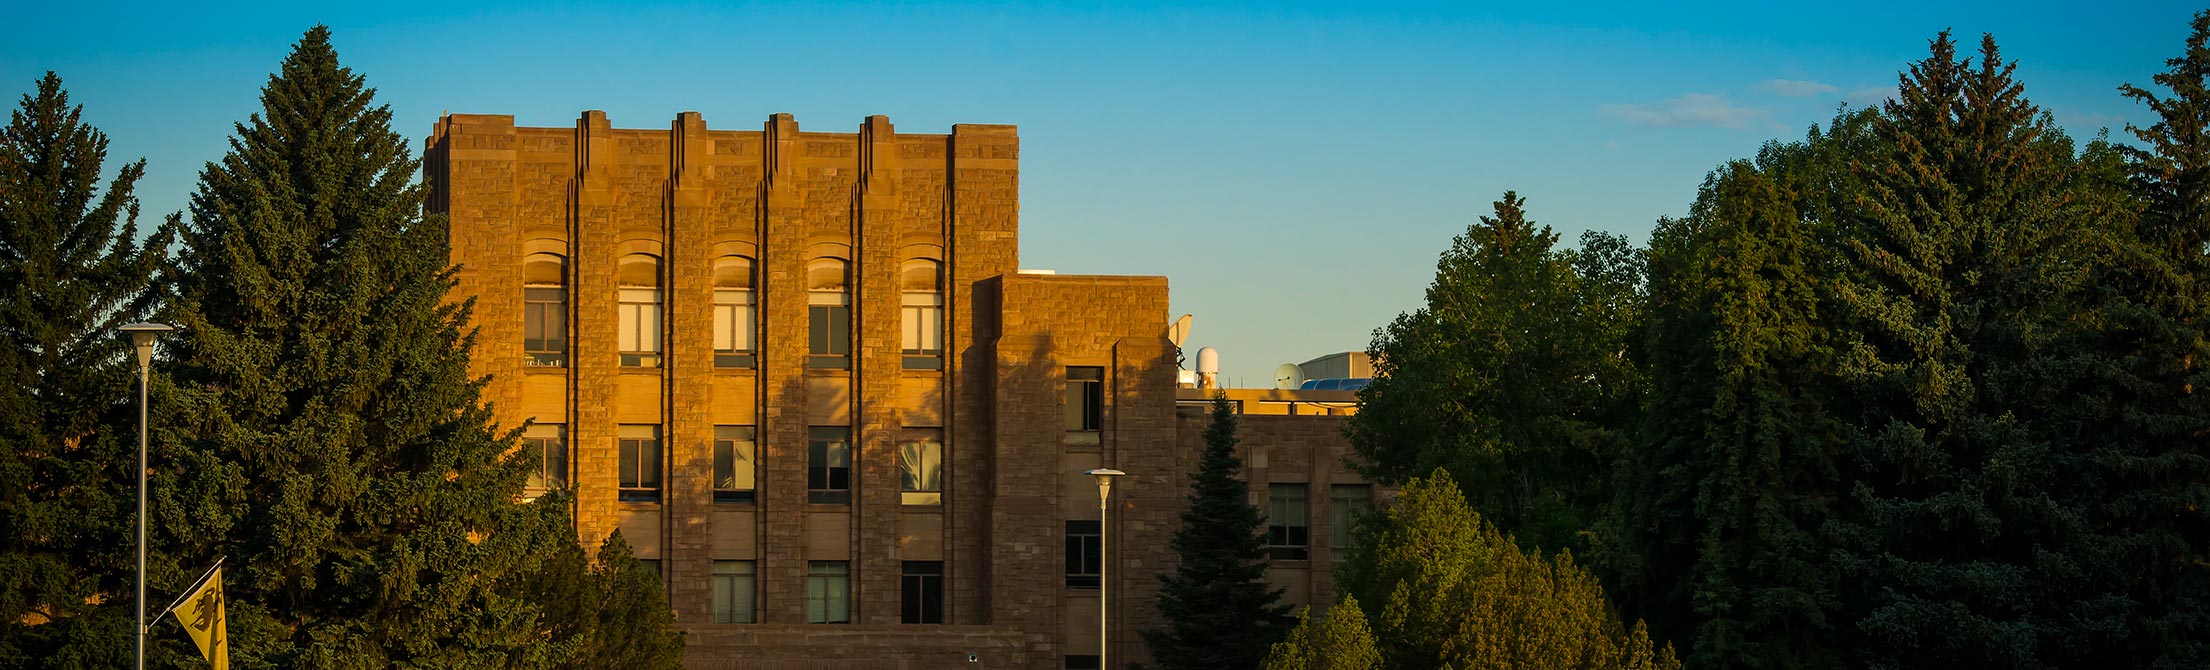 the college of arts and science building at sunset